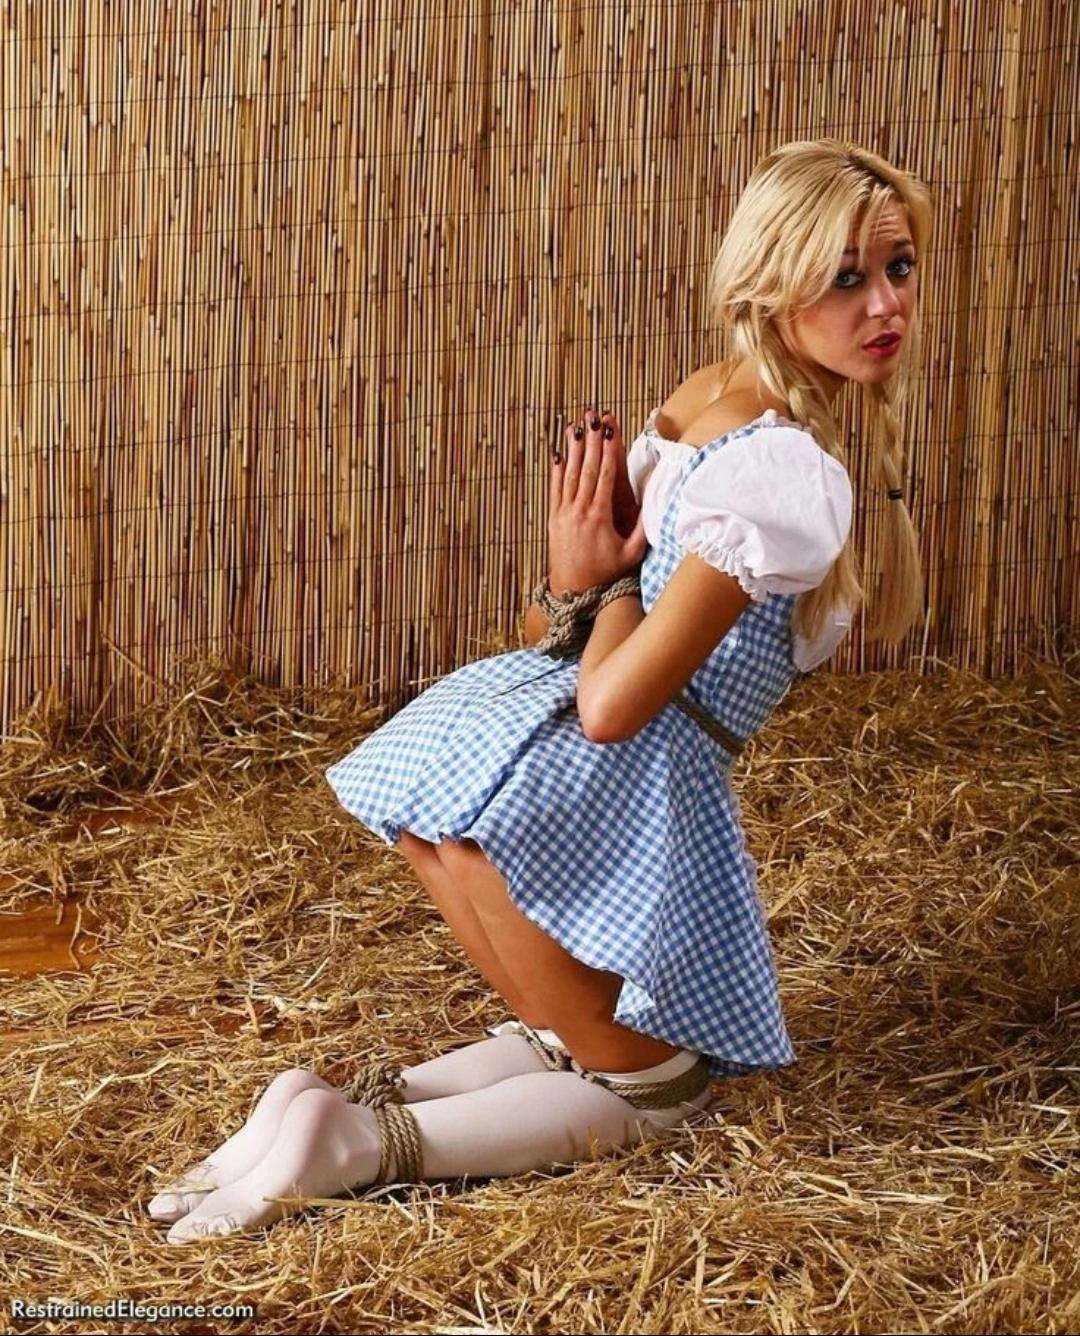 German girl bound in the barn pic image